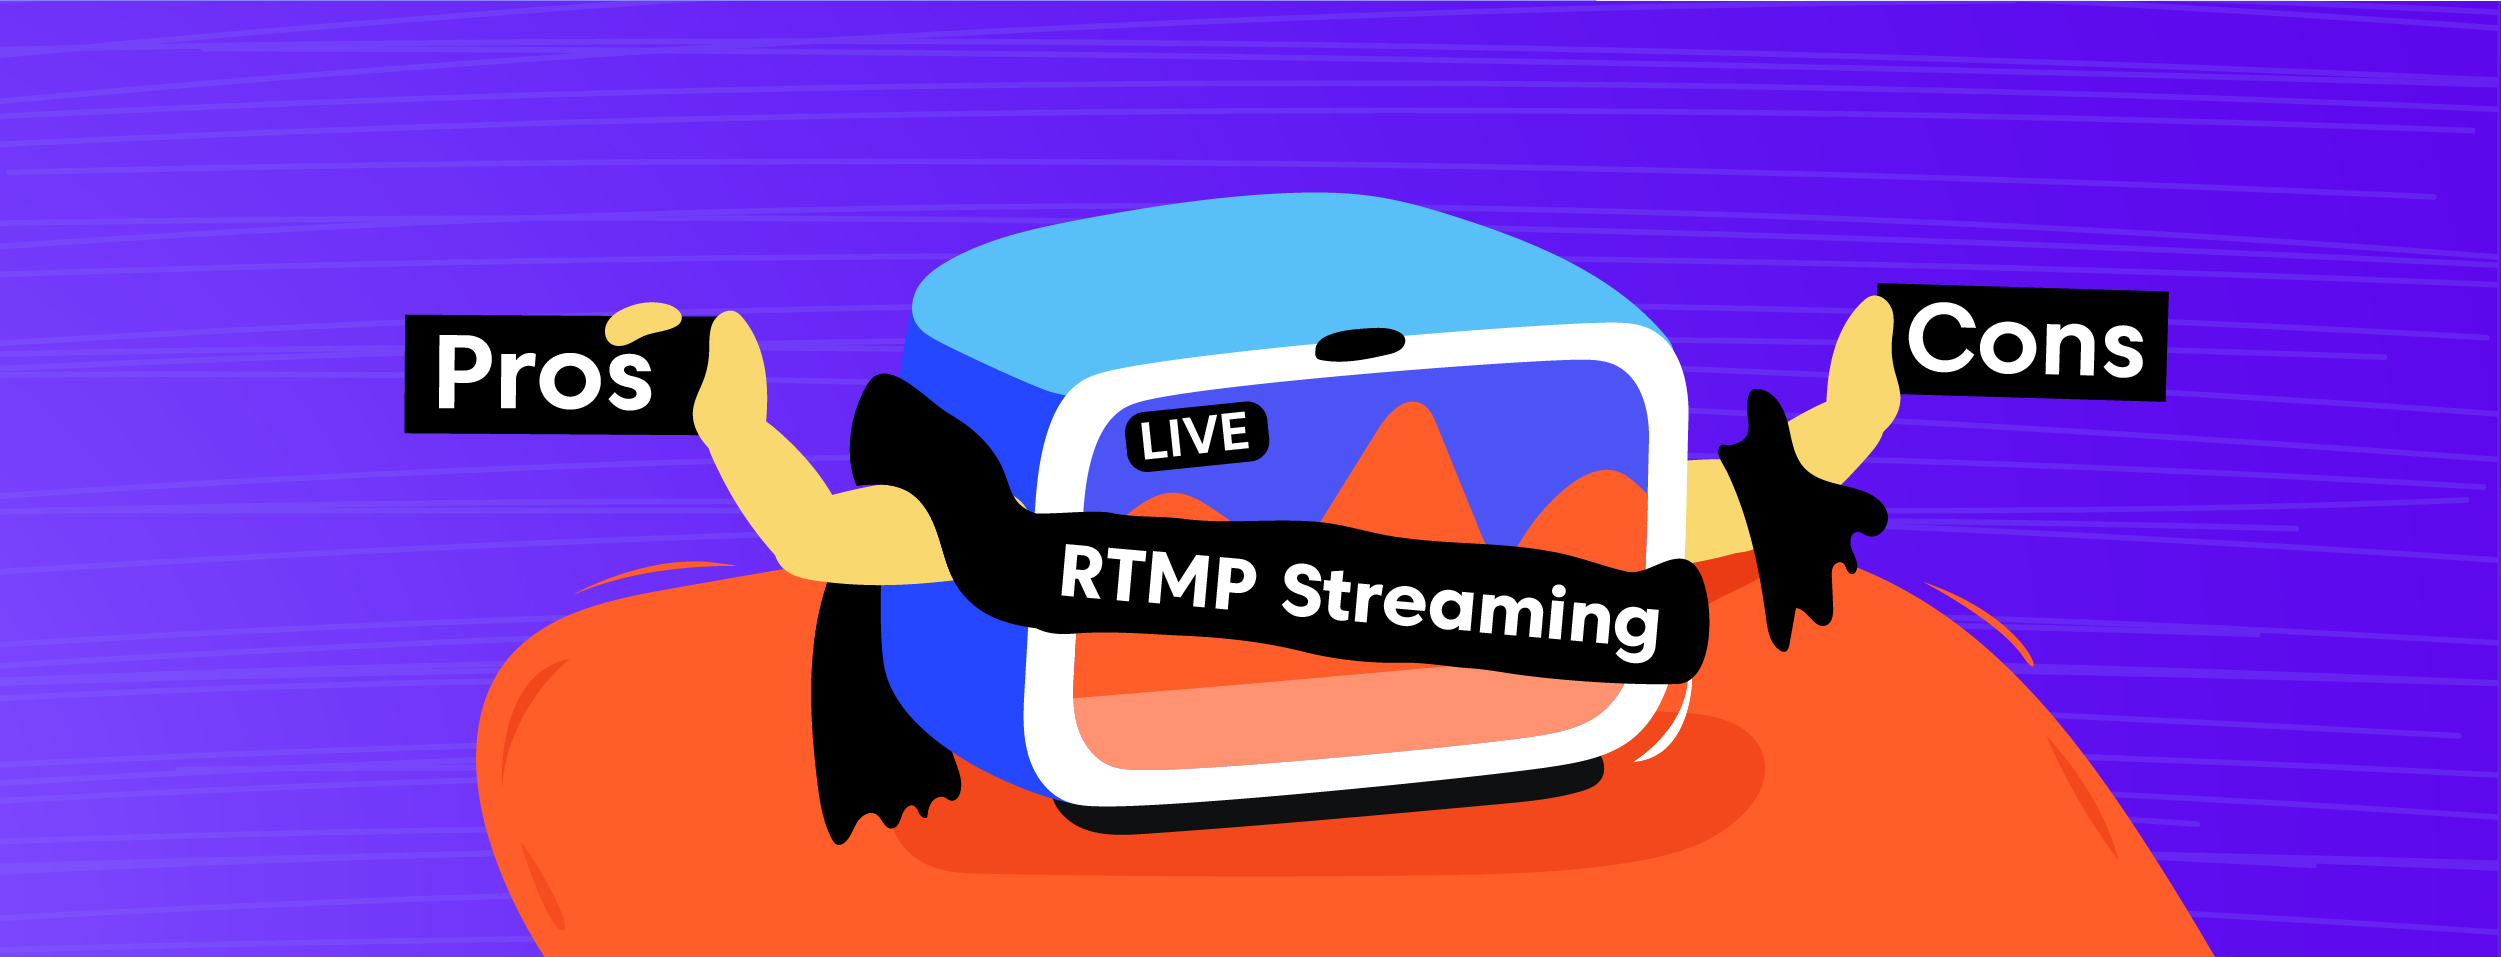 Pros and Cons of Using RTMP Streaming